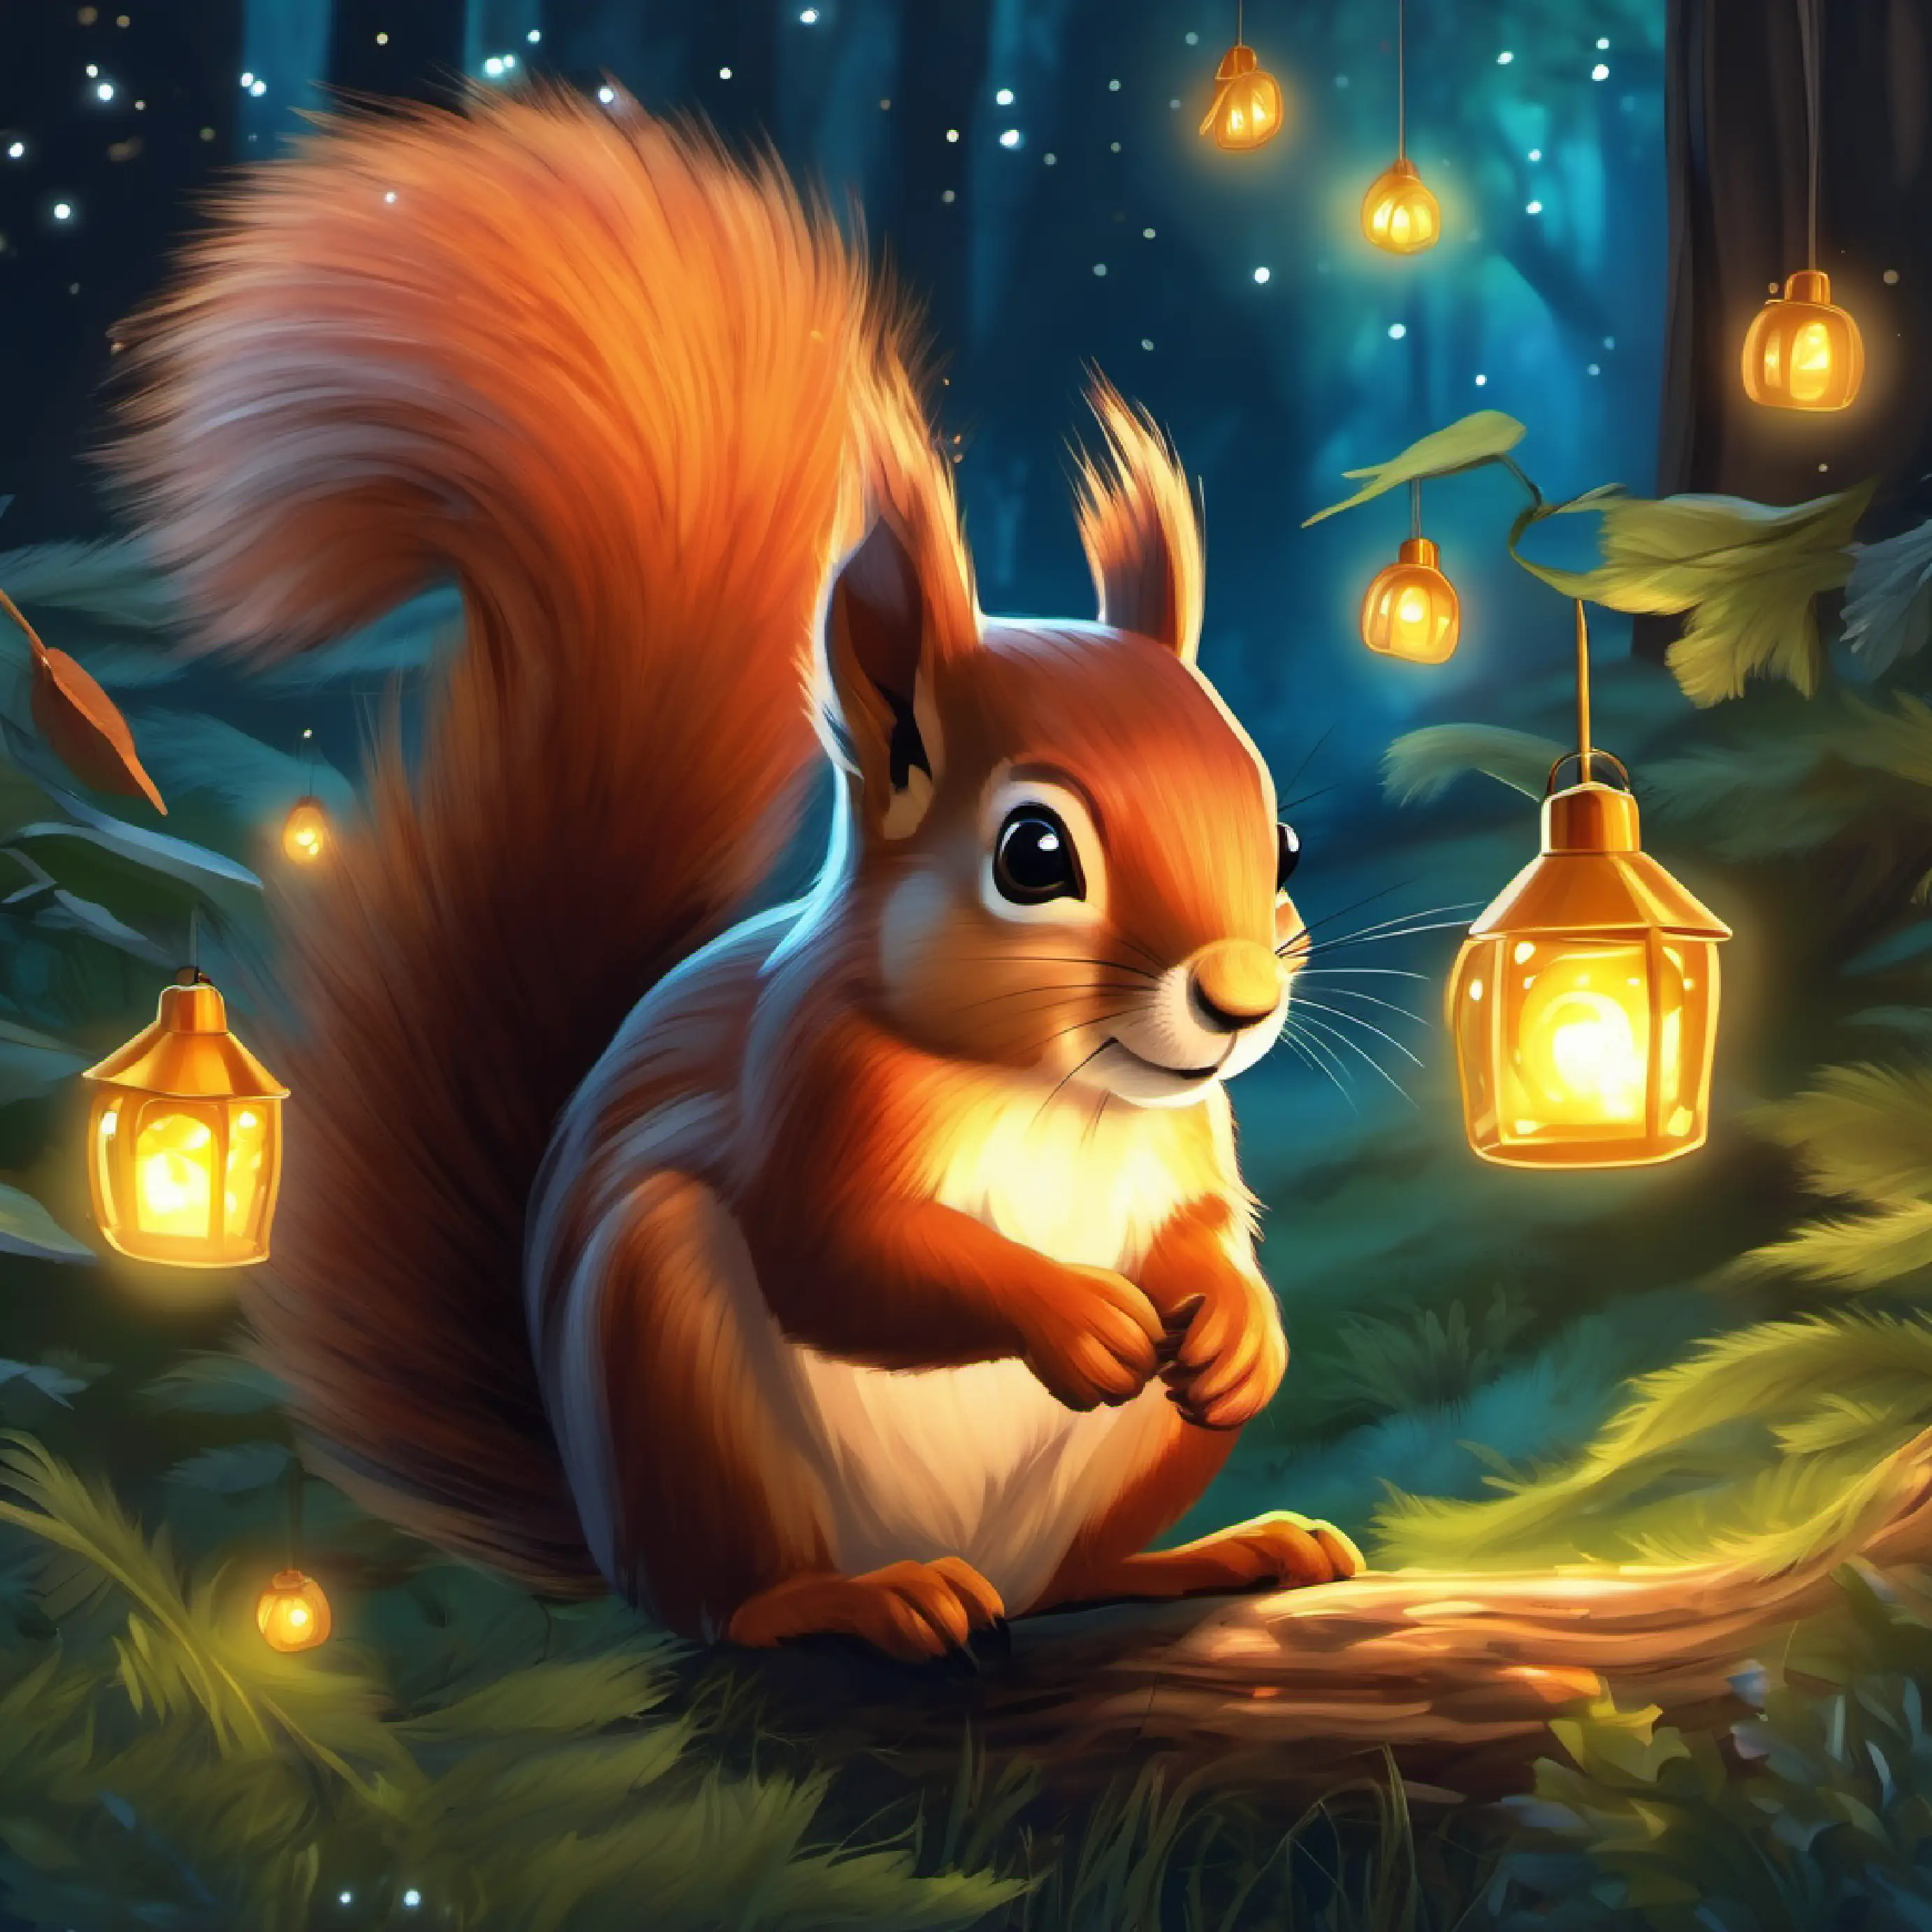 The dream journey continues with animals led by a brave squirrel through a firefly glade.